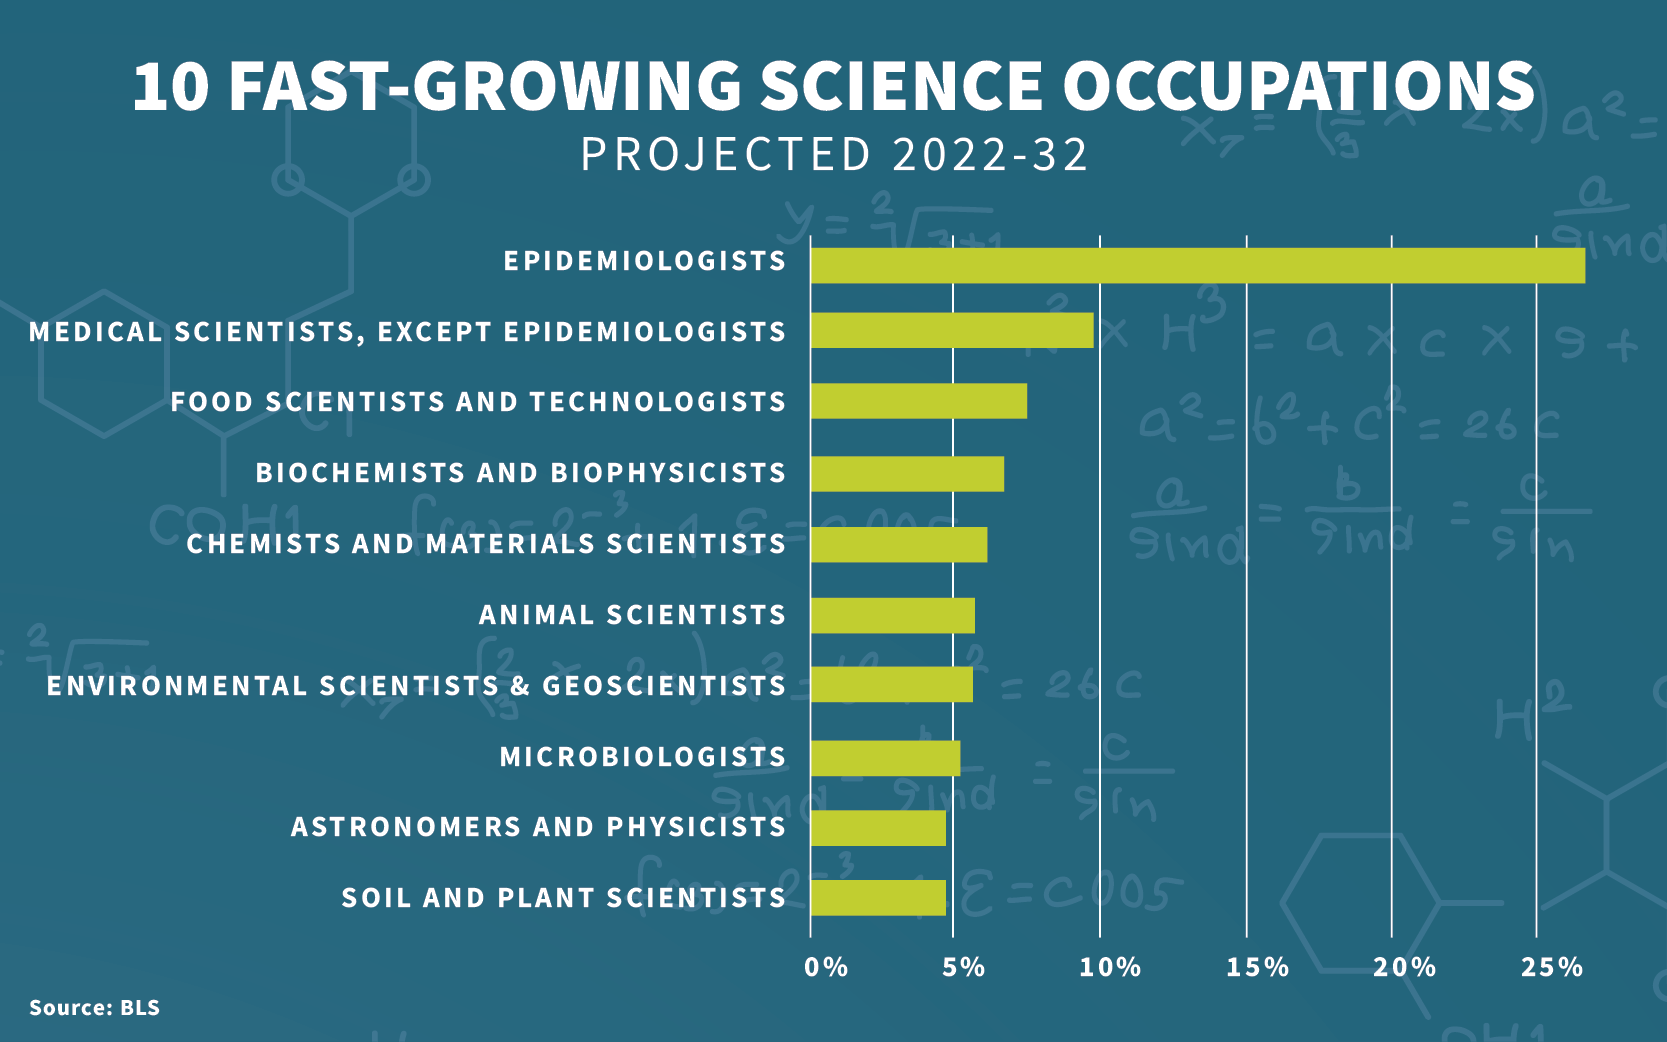 Chart showing 10 fast-growing science occupations (projected 2022-2032). In order of fastest growing, they include epidemiologists, medical scientists (except epidemiologists), food scientists and technologists, biochemists and biophysicists, chemists and materials scientists, animal scientists, environmental scientists and geoscientists, microbiologists, astronomers and physicists, and soil and plant scientists. Source: BLS